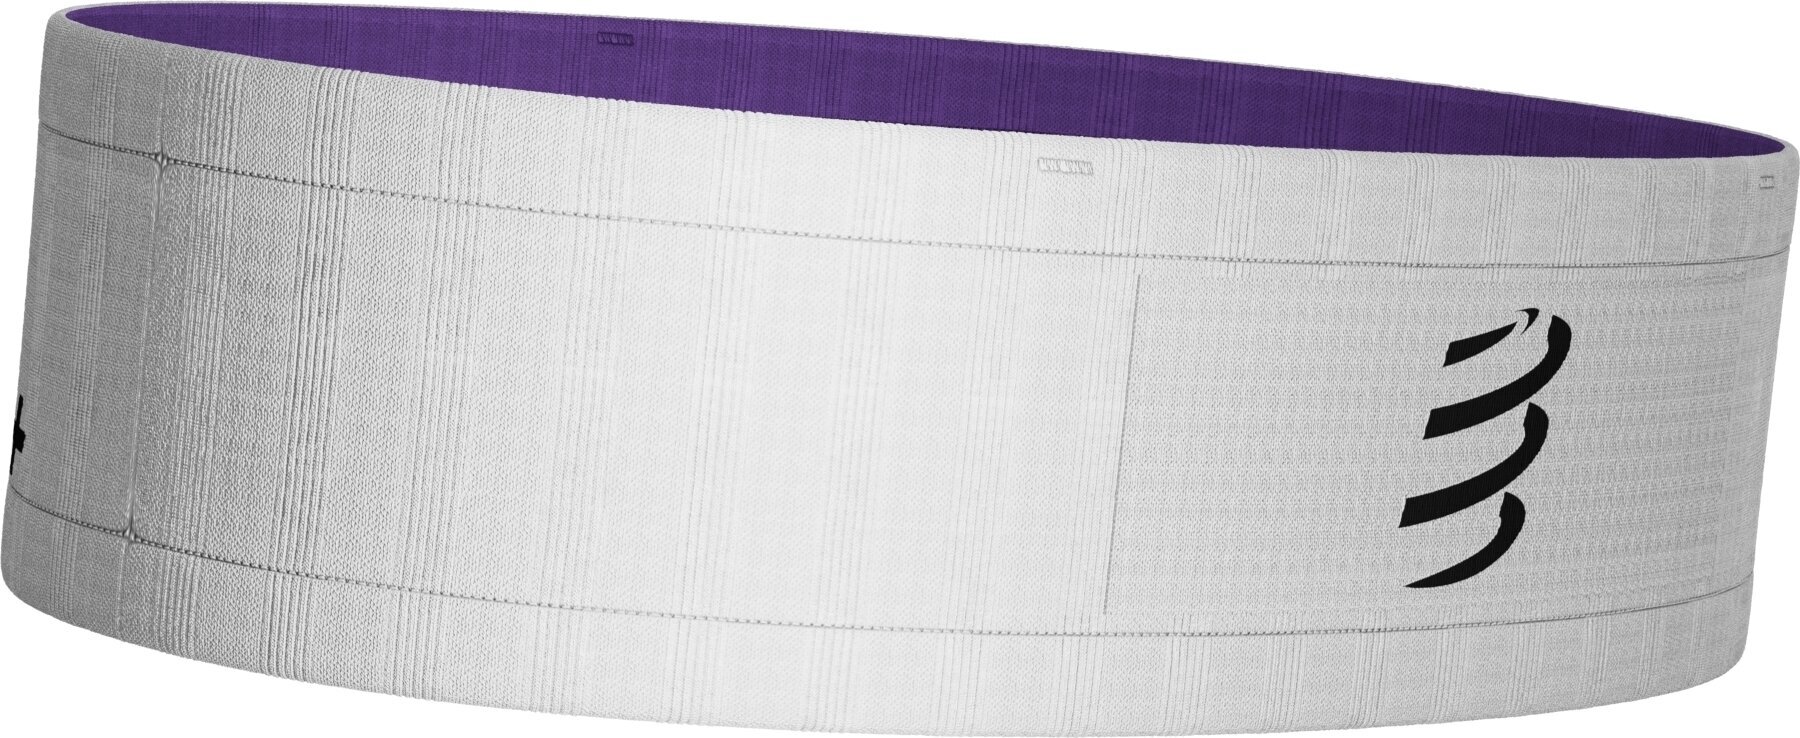 Cas courant Compressport Free Belt White/Royal Lilac XS/S Cas courant